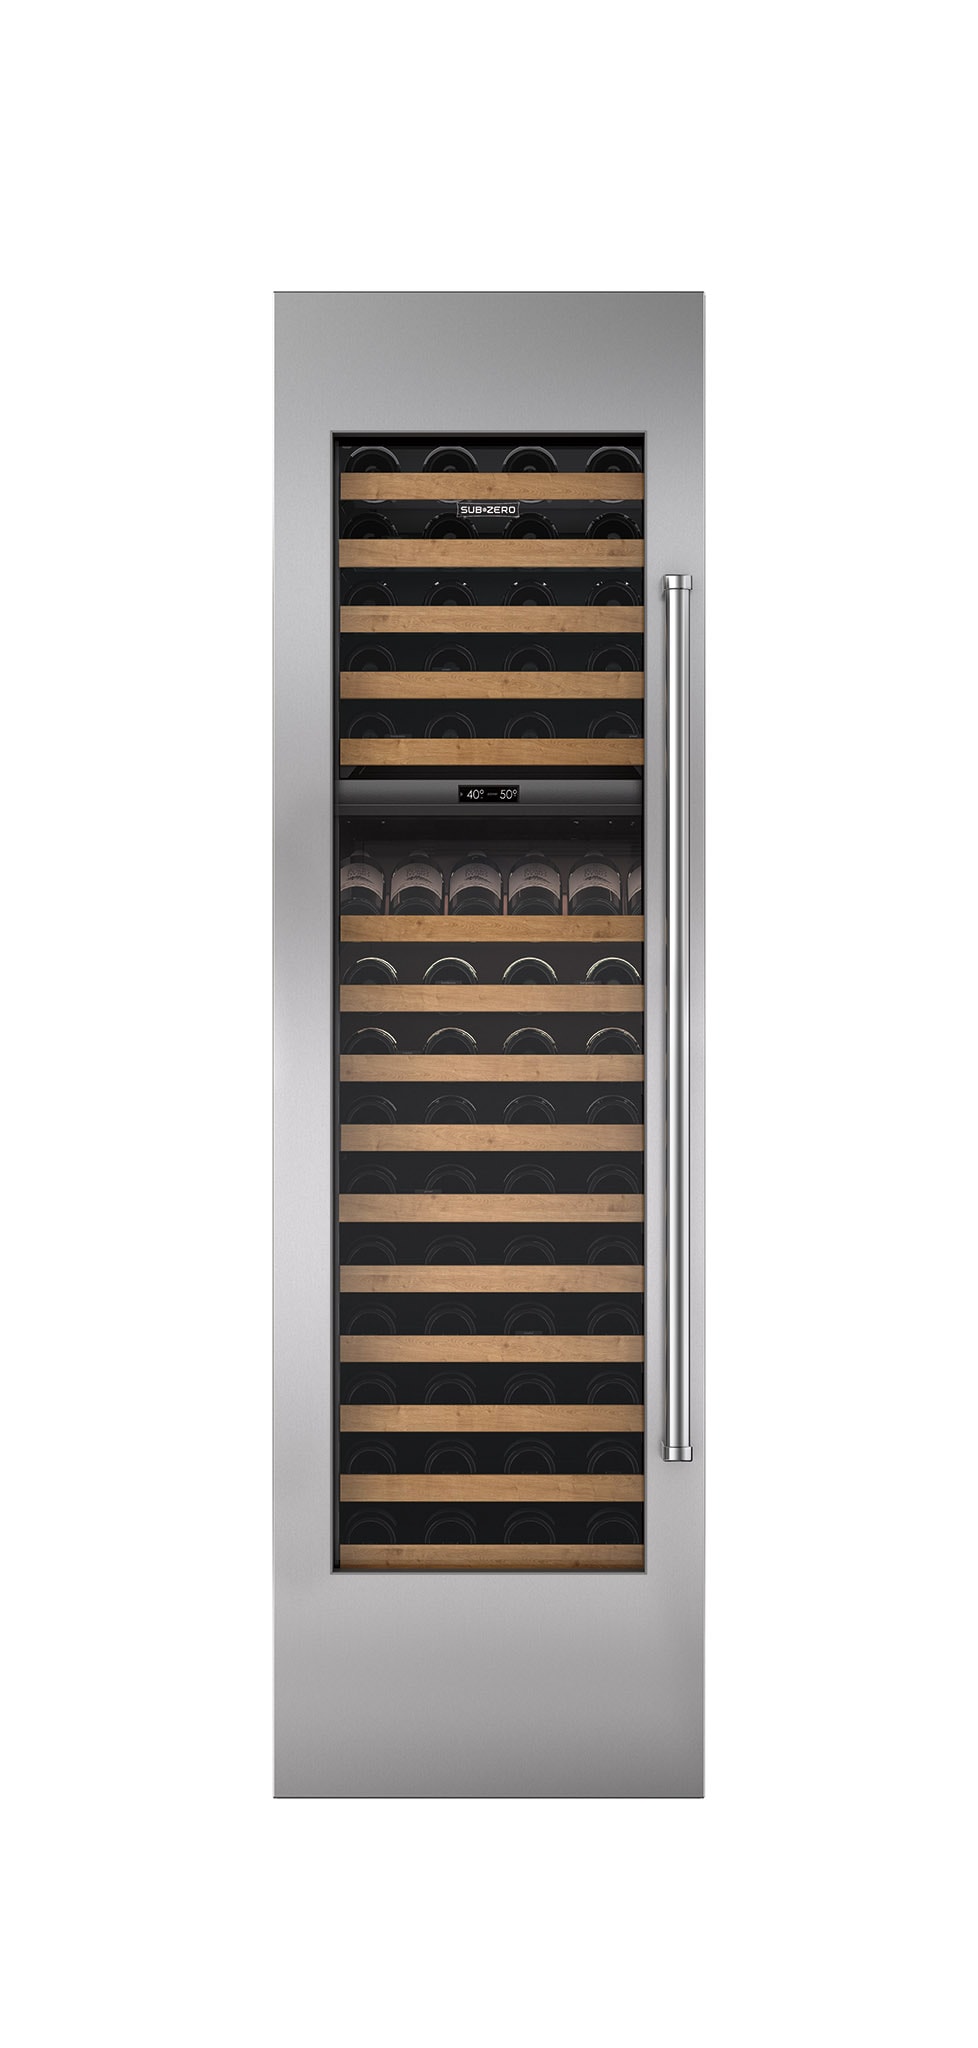 Stainless Steel Wine Storage Door Panel with Pro Handle and 4